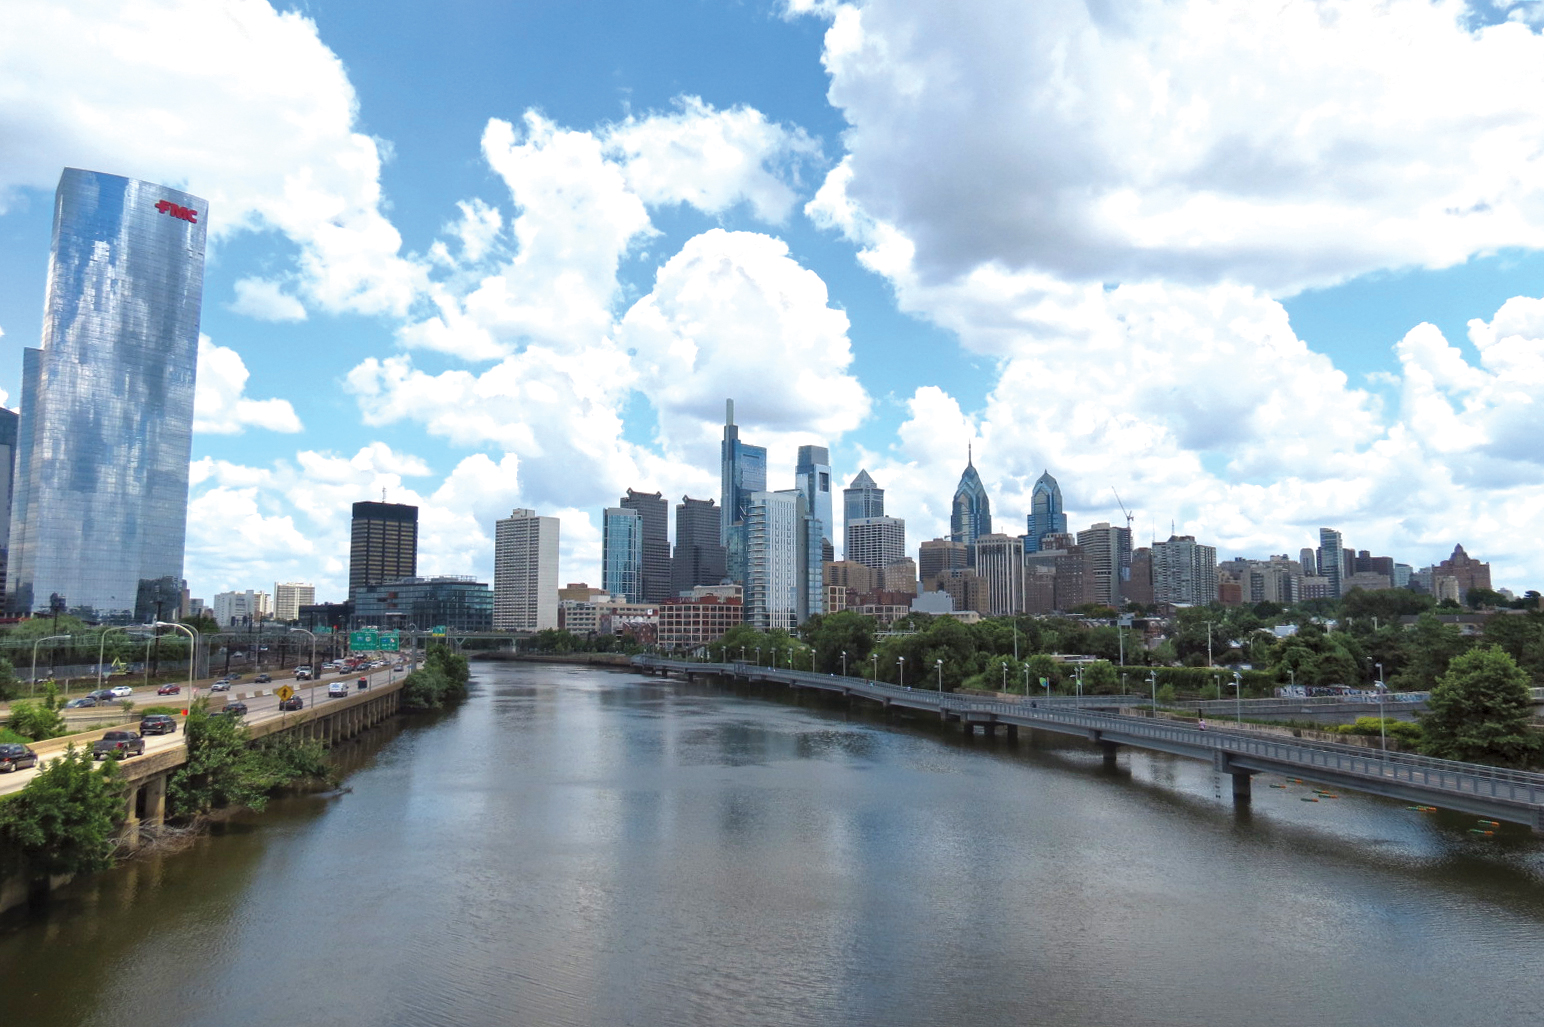 A view taken over the Schuylkill River, looking upstream, from around the South Street Bridge. As the river curves off to the left, the Center City skyline is front and center. The Schuylkill Boardwalk is visible along the right side of the river, I-76 Schuylkill Expressway on the left, and the top half of the picture is dominated by a blue sky full of fluffy white clouds.